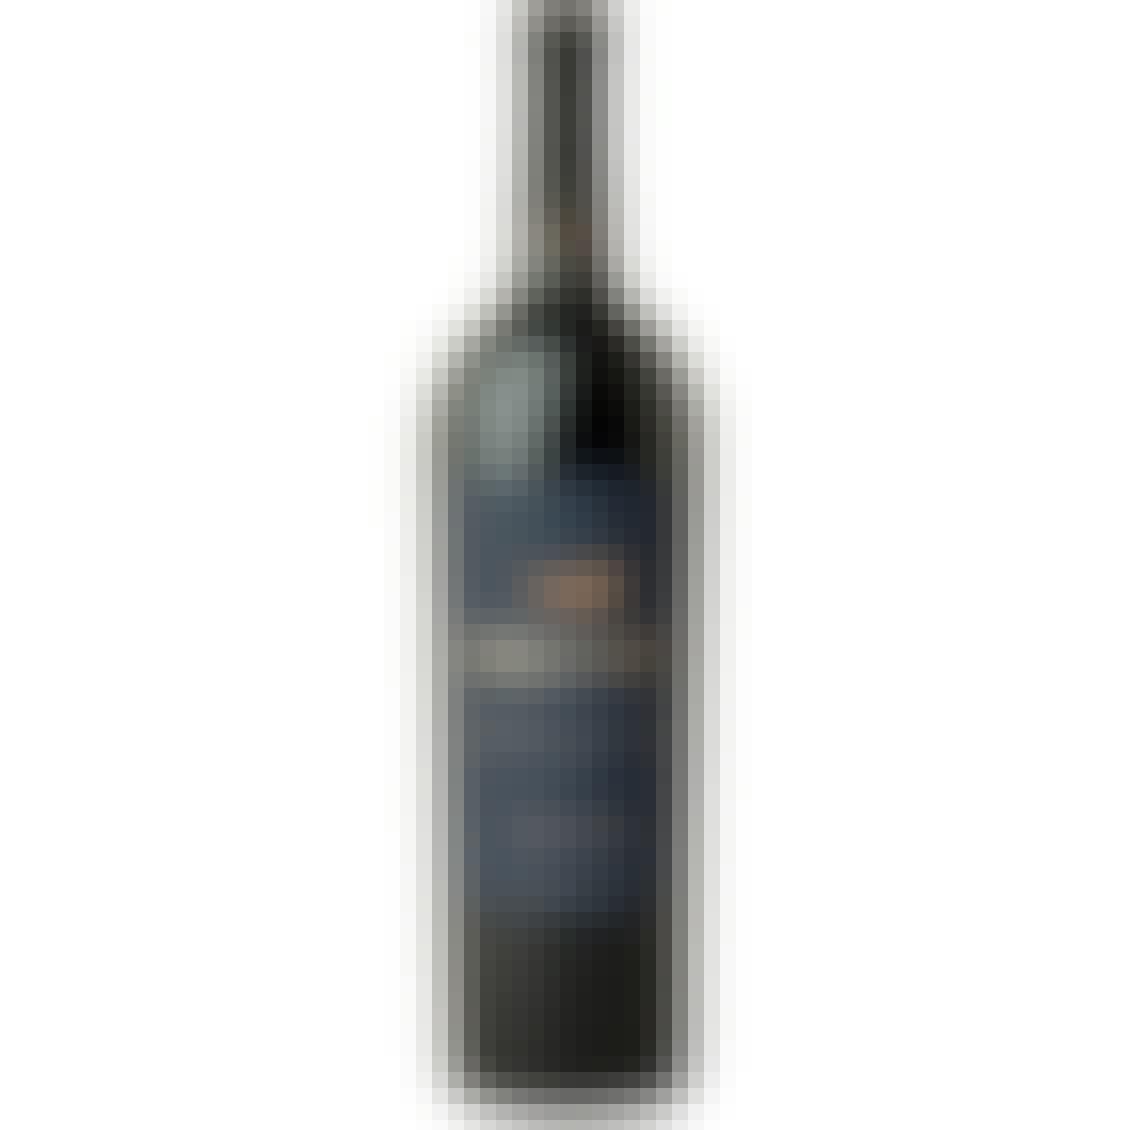 Decoy Limited Napa Valley Red Wine 750ml